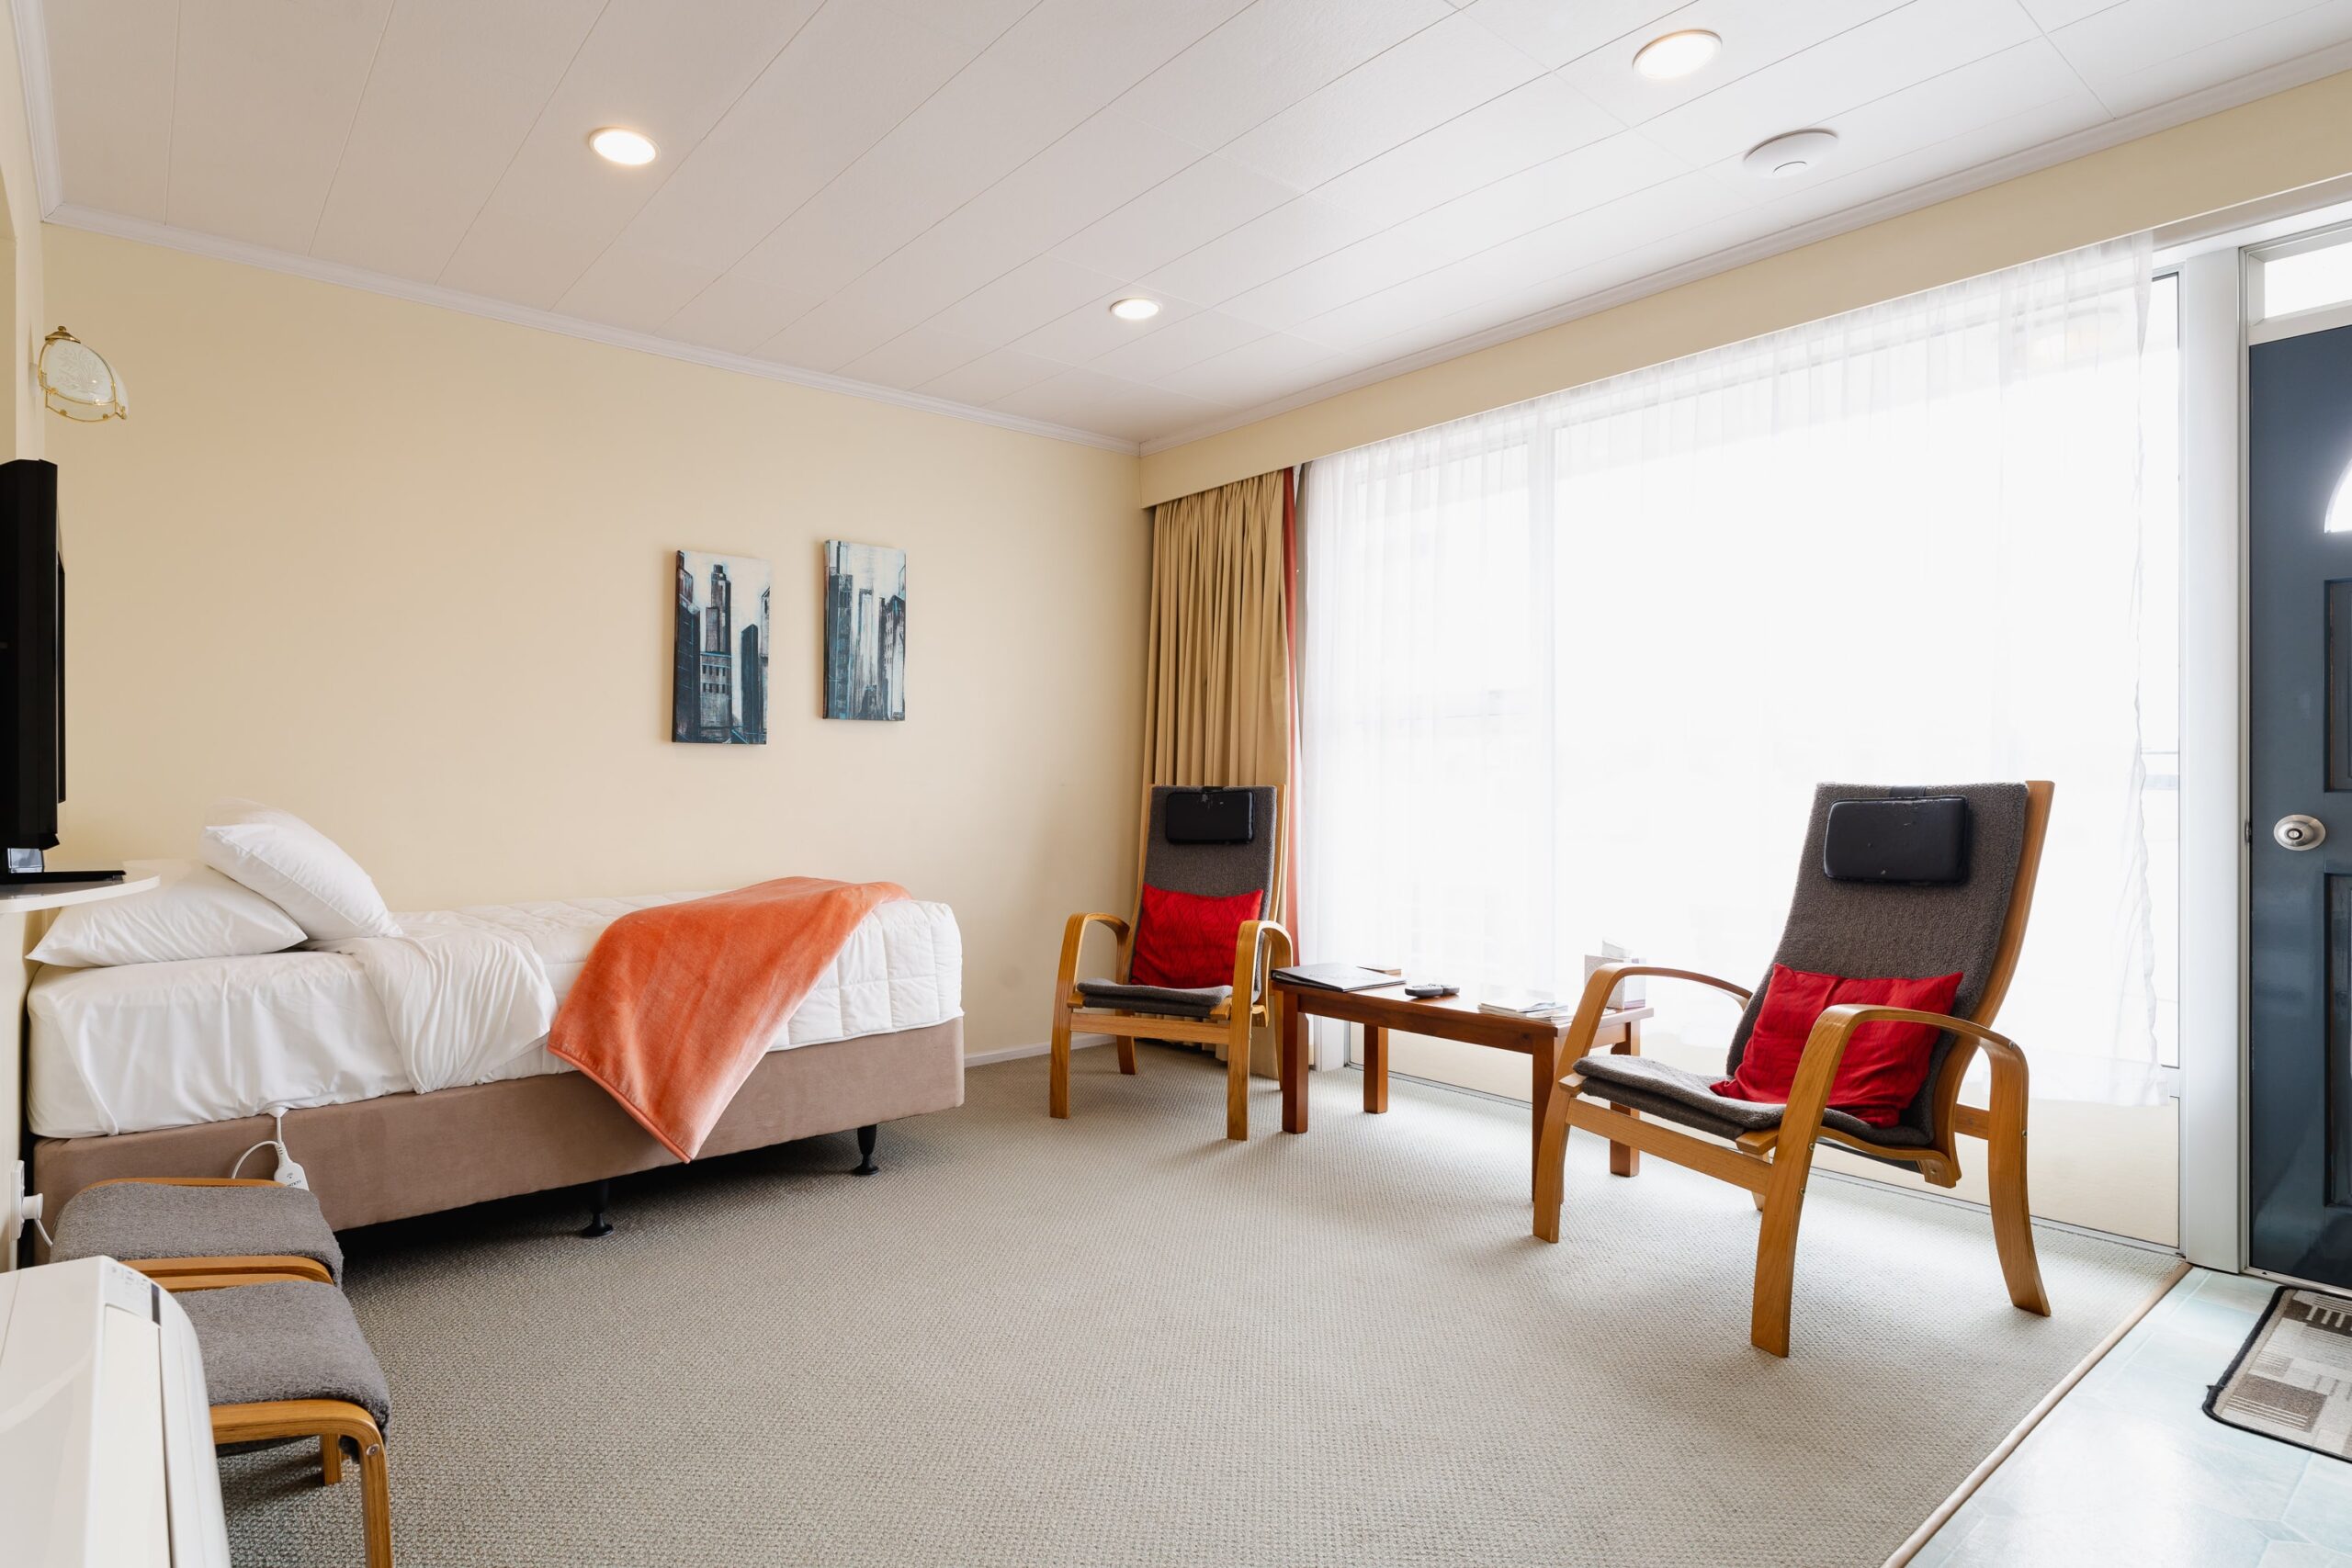 Highway Lodge Motel Accommodation In Balclutha - Queen One-Bedroom Unit